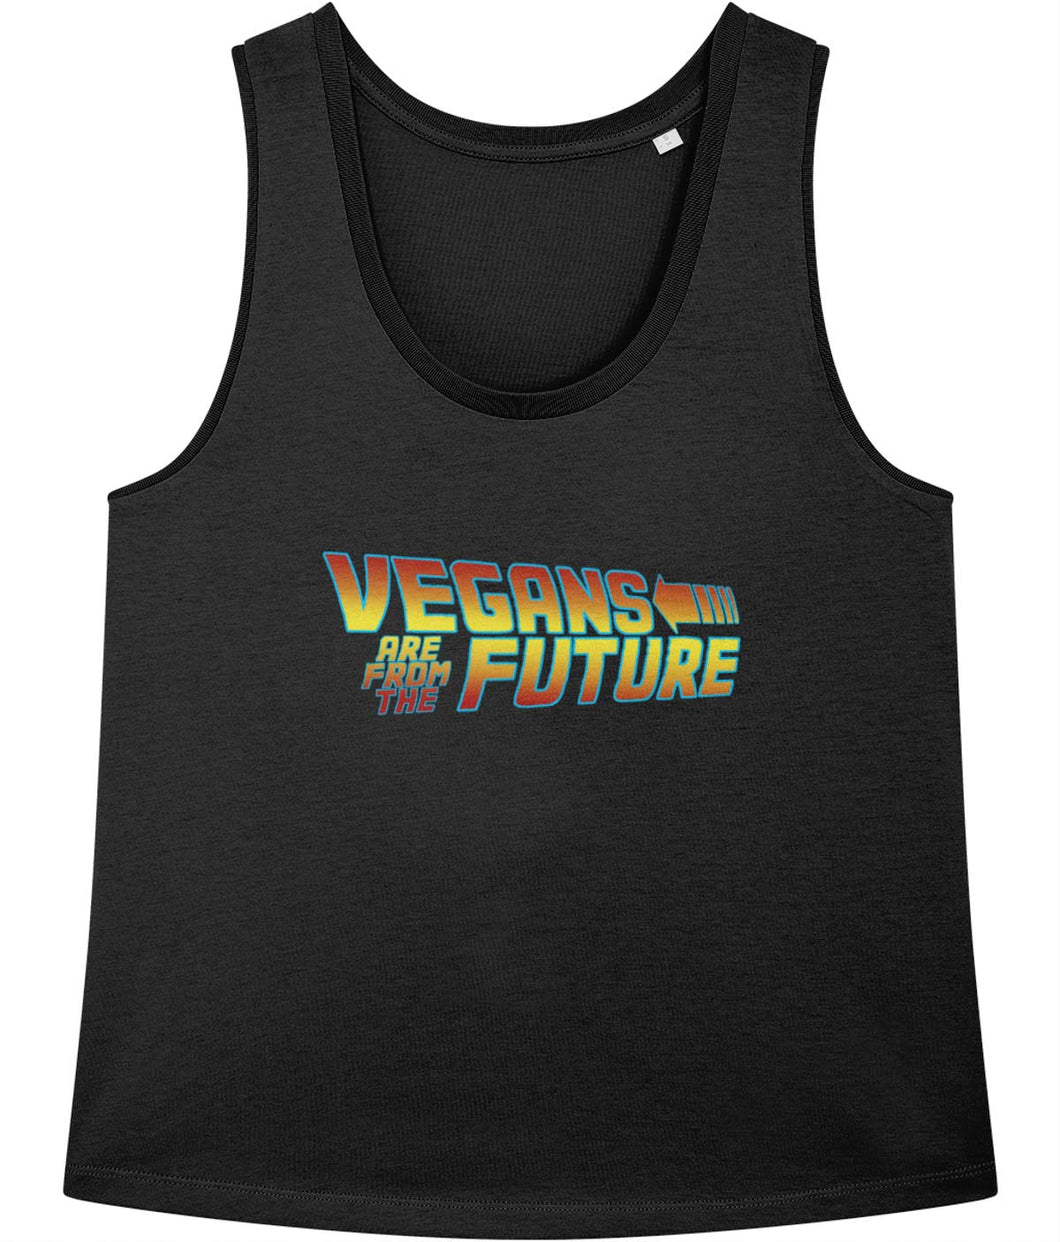 Black vegans are from the future tank top